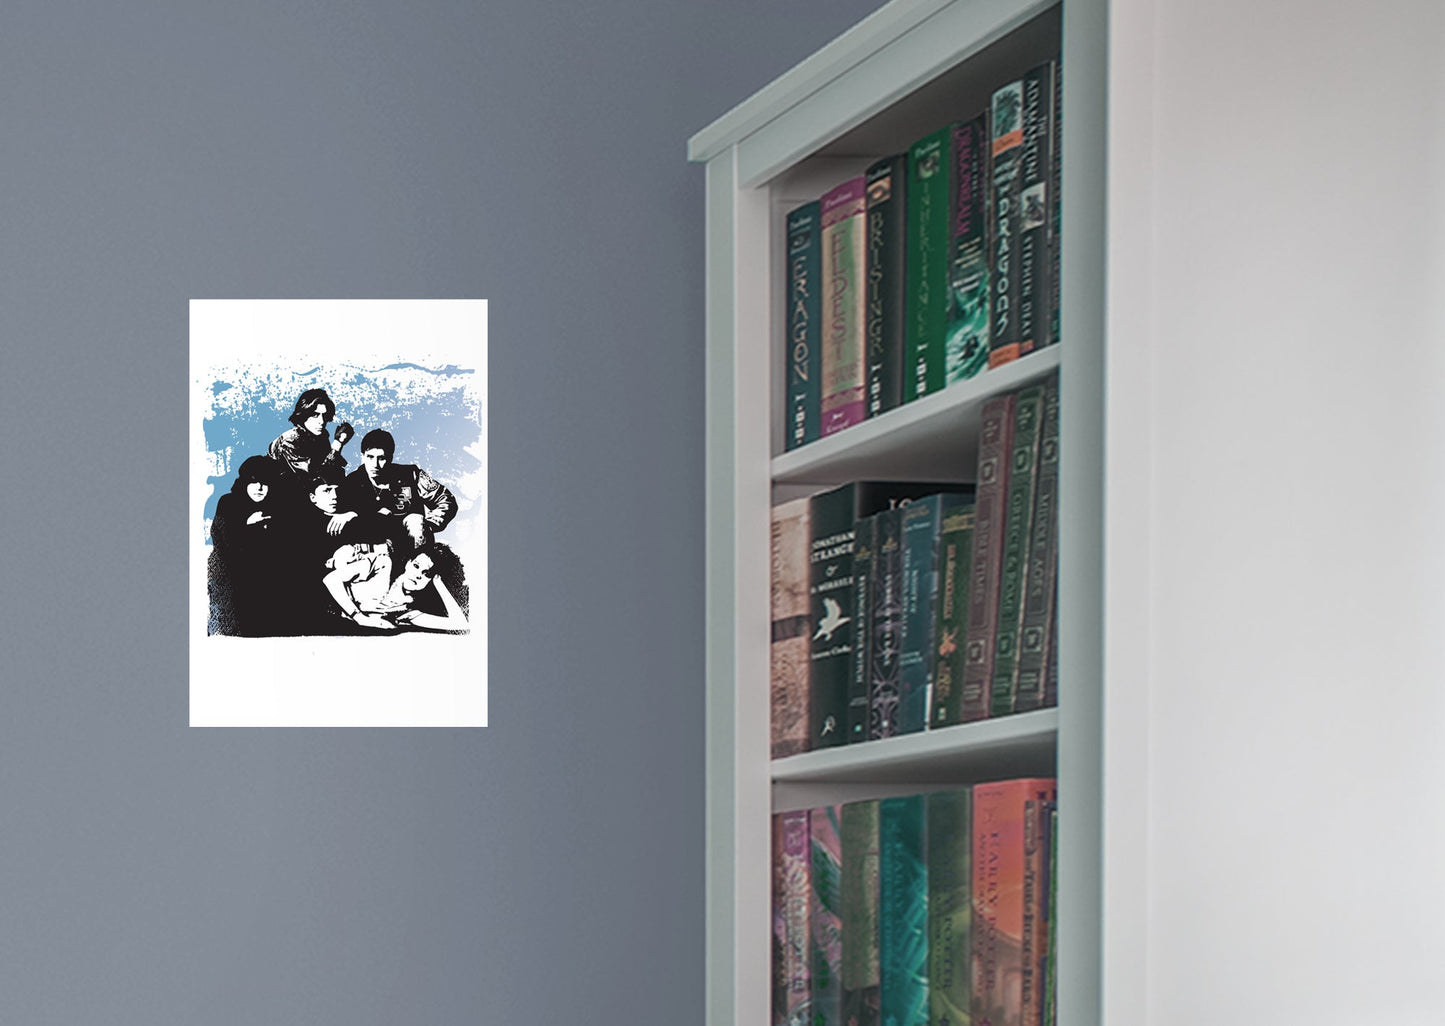 The Breakfast Club:  Group Poster Mural        - Officially Licensed NBC Universal Removable Wall   Adhesive Decal